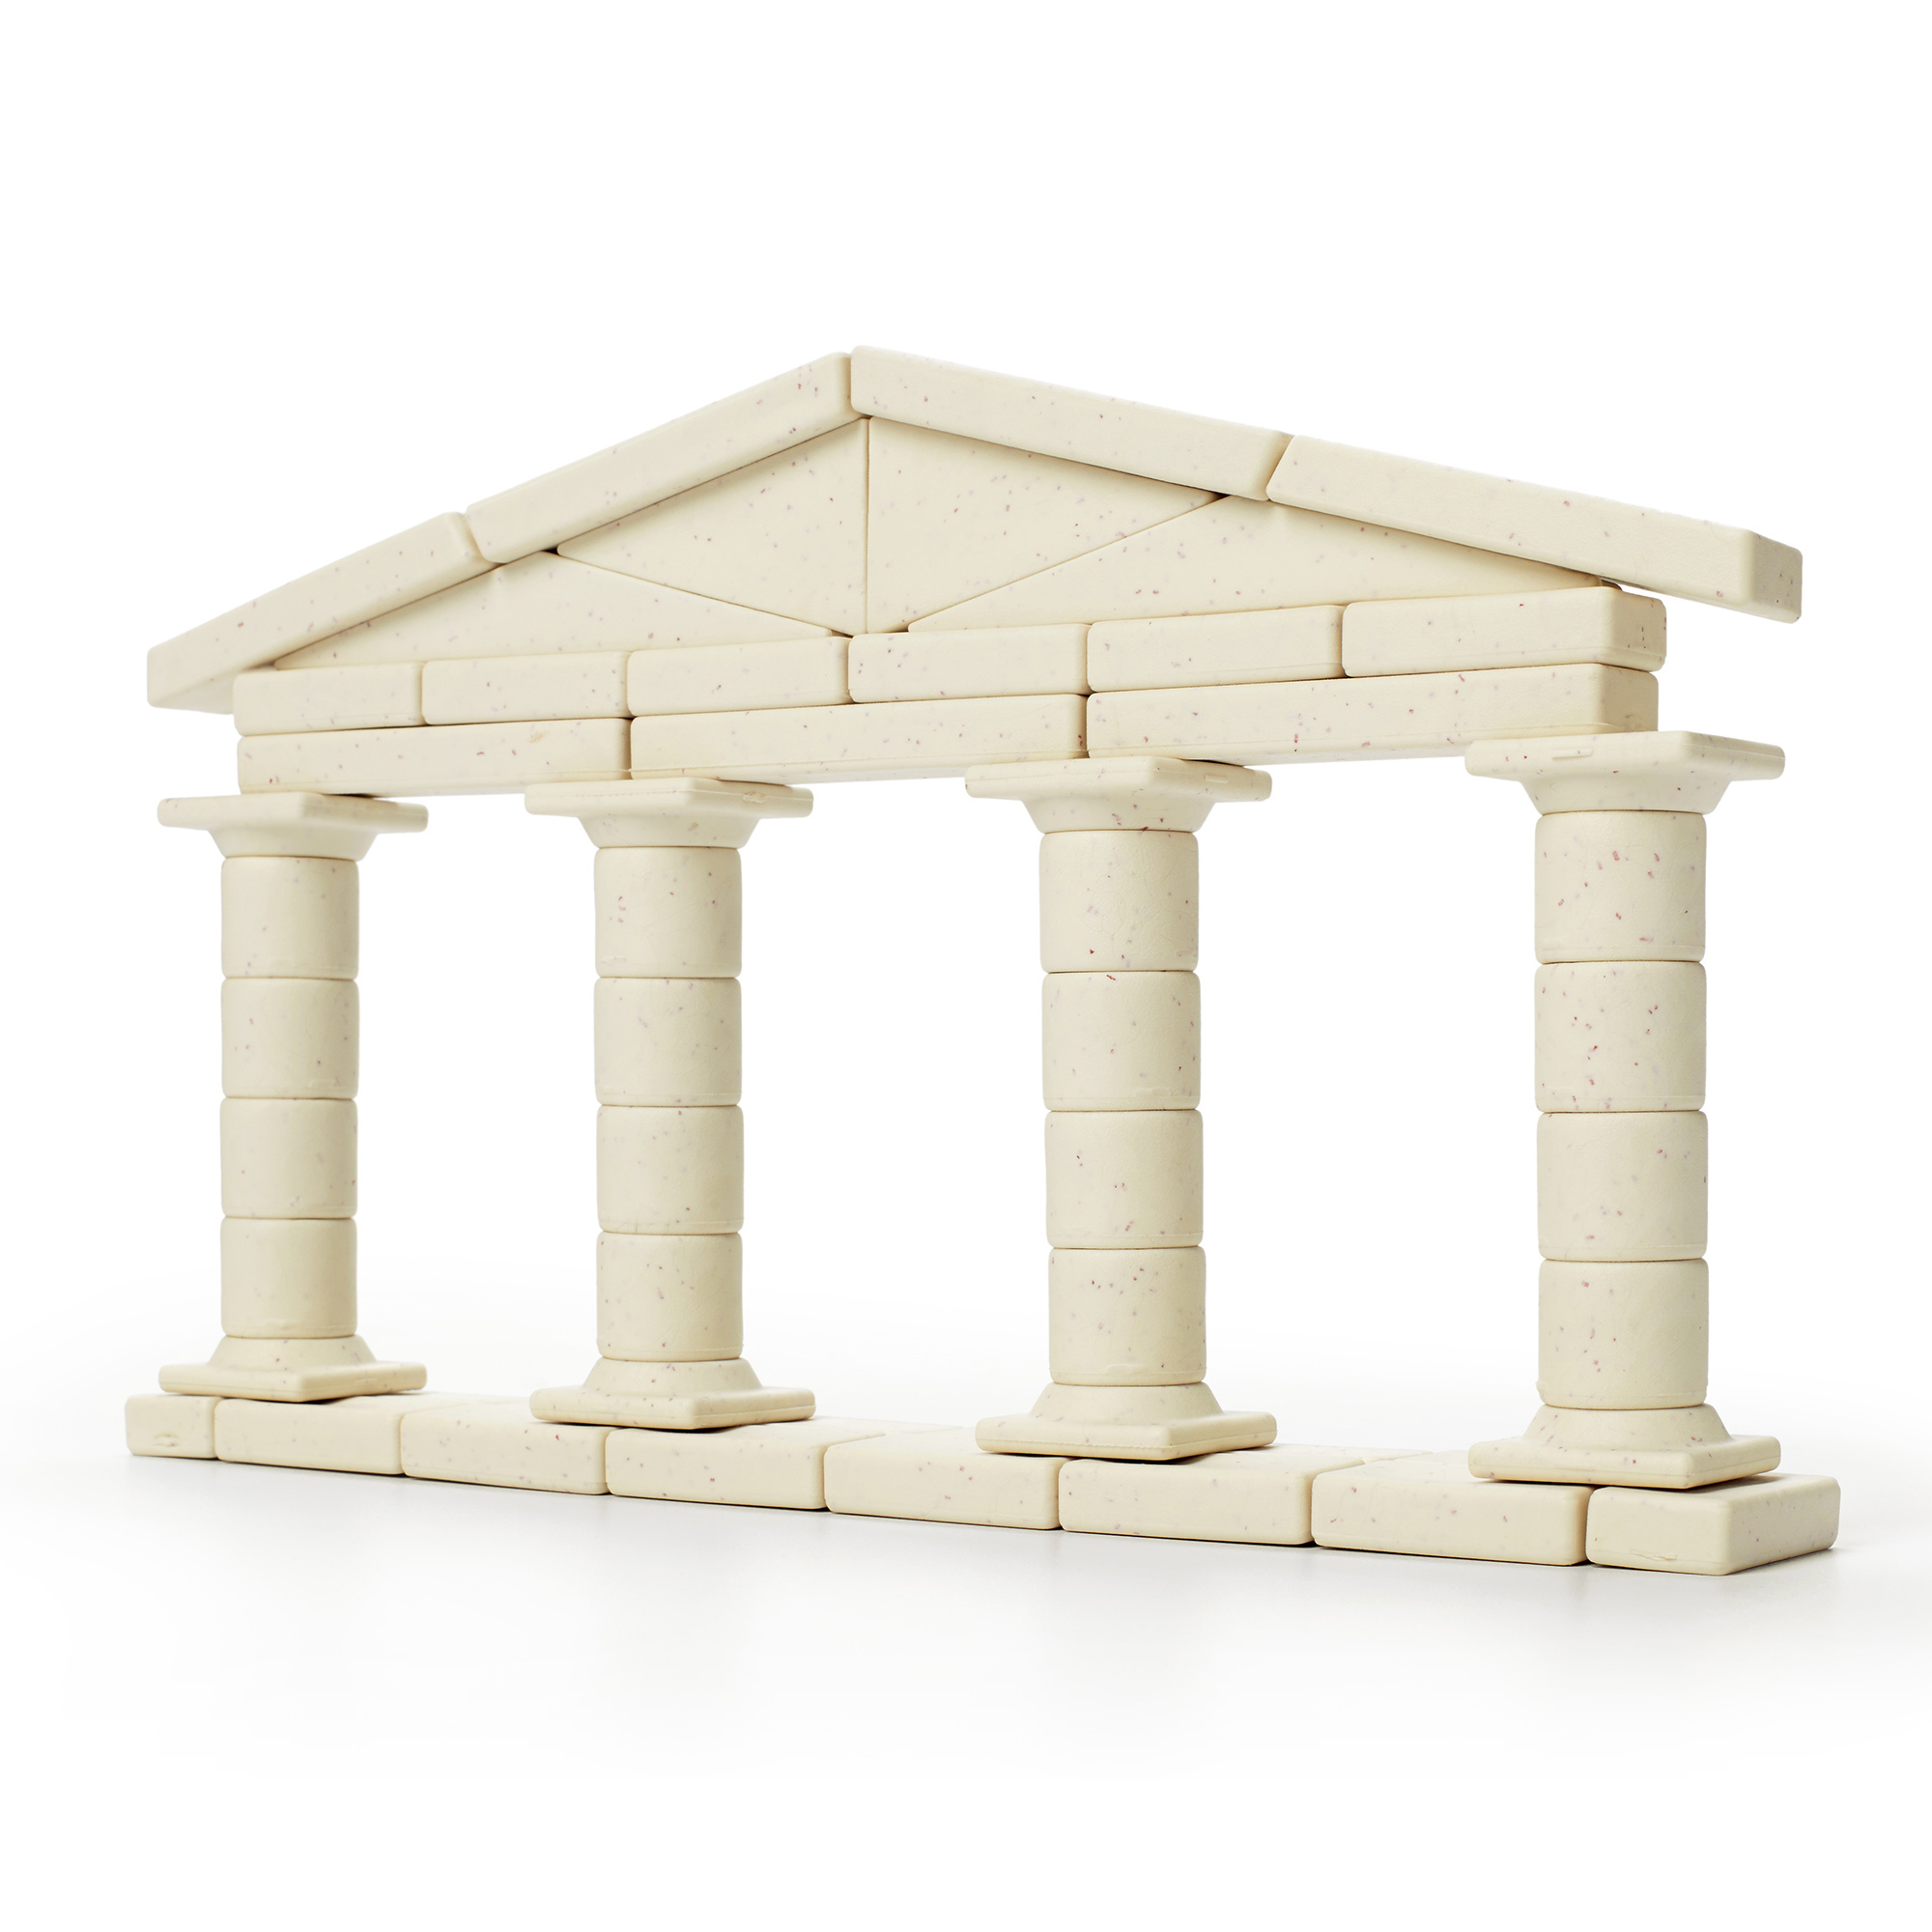 Taksa Toys Ancient Roman Arch Stem Toys Premium Educational Stackable  Building Blocks, for Kids Ages 7 8 9 10+ Years Old, Indoor Architectural  Kit